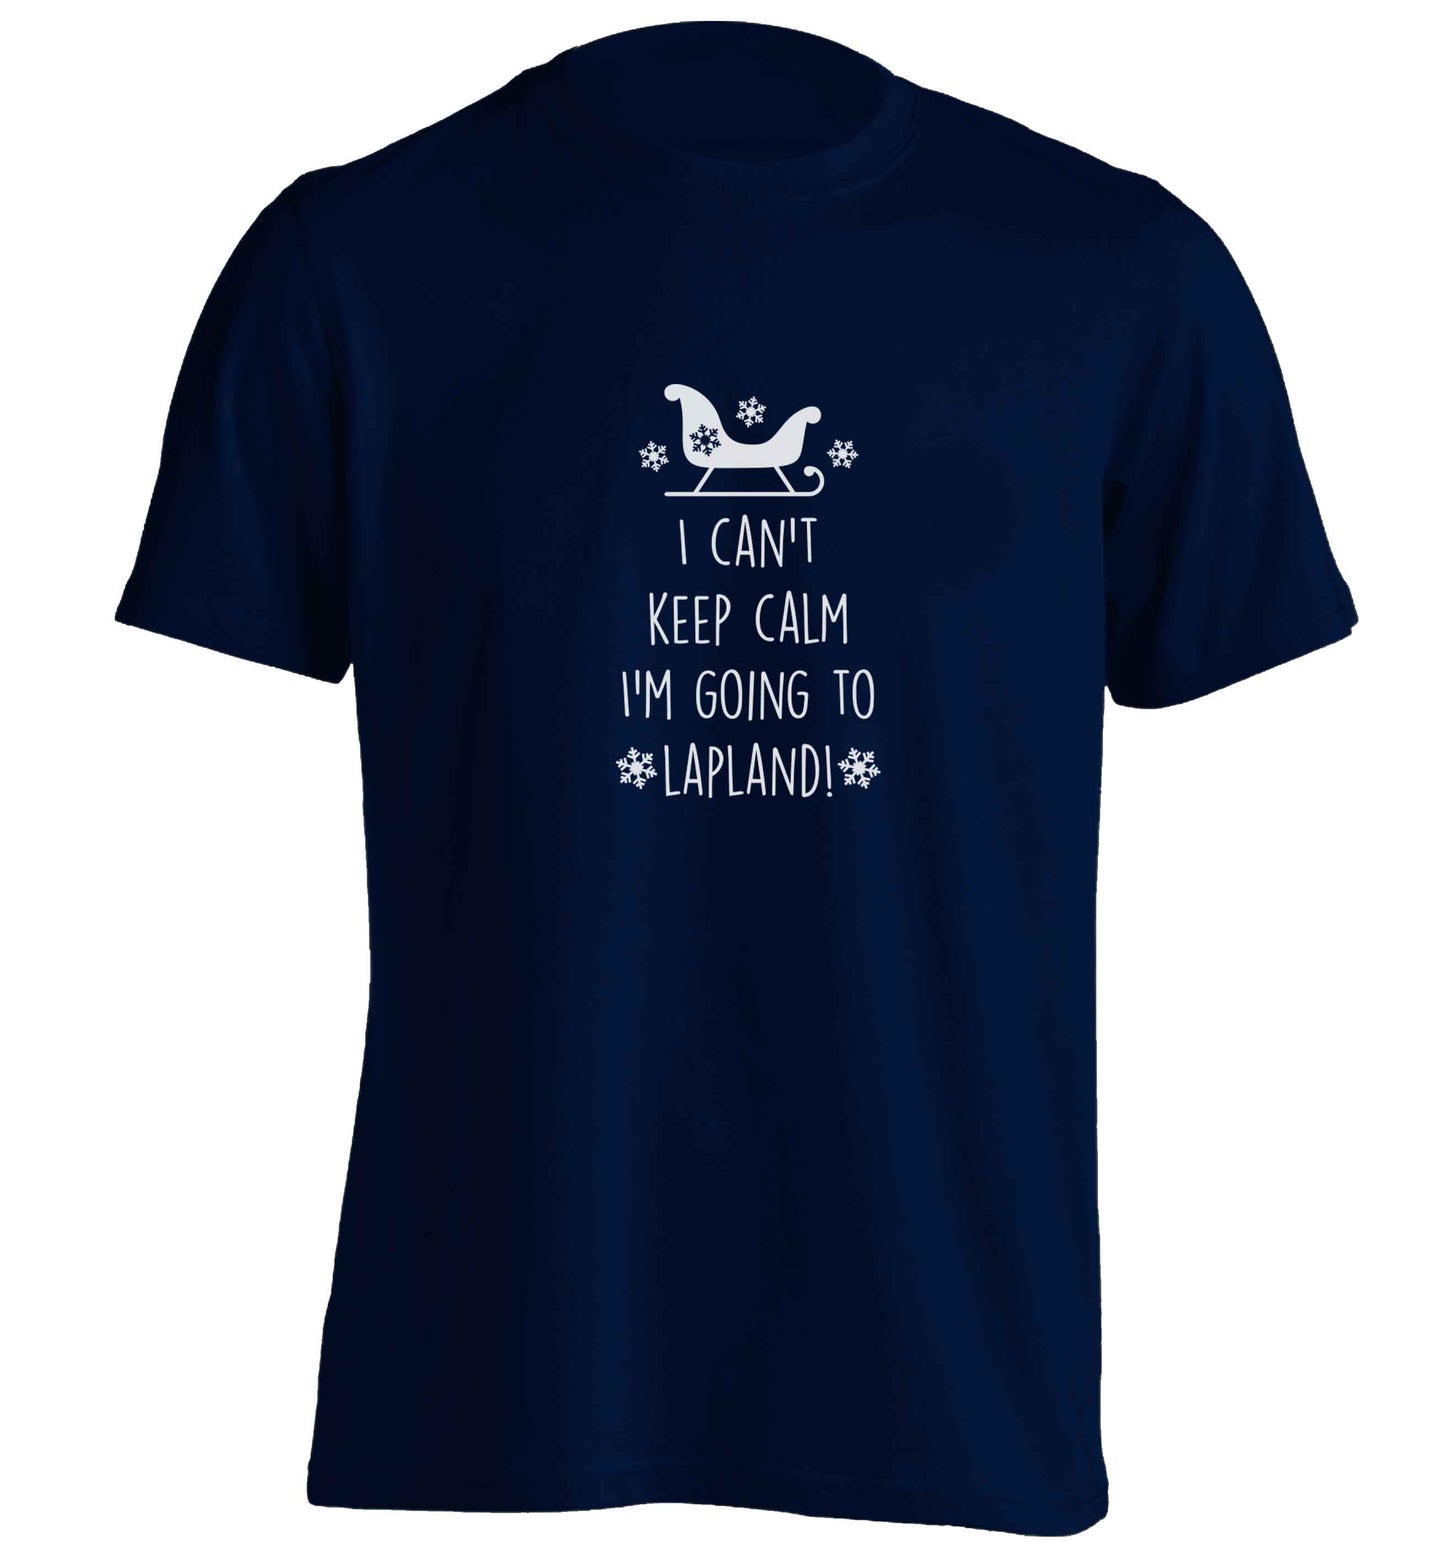 I can't keep calm I'm going to Lapland adults unisex navy Tshirt 2XL